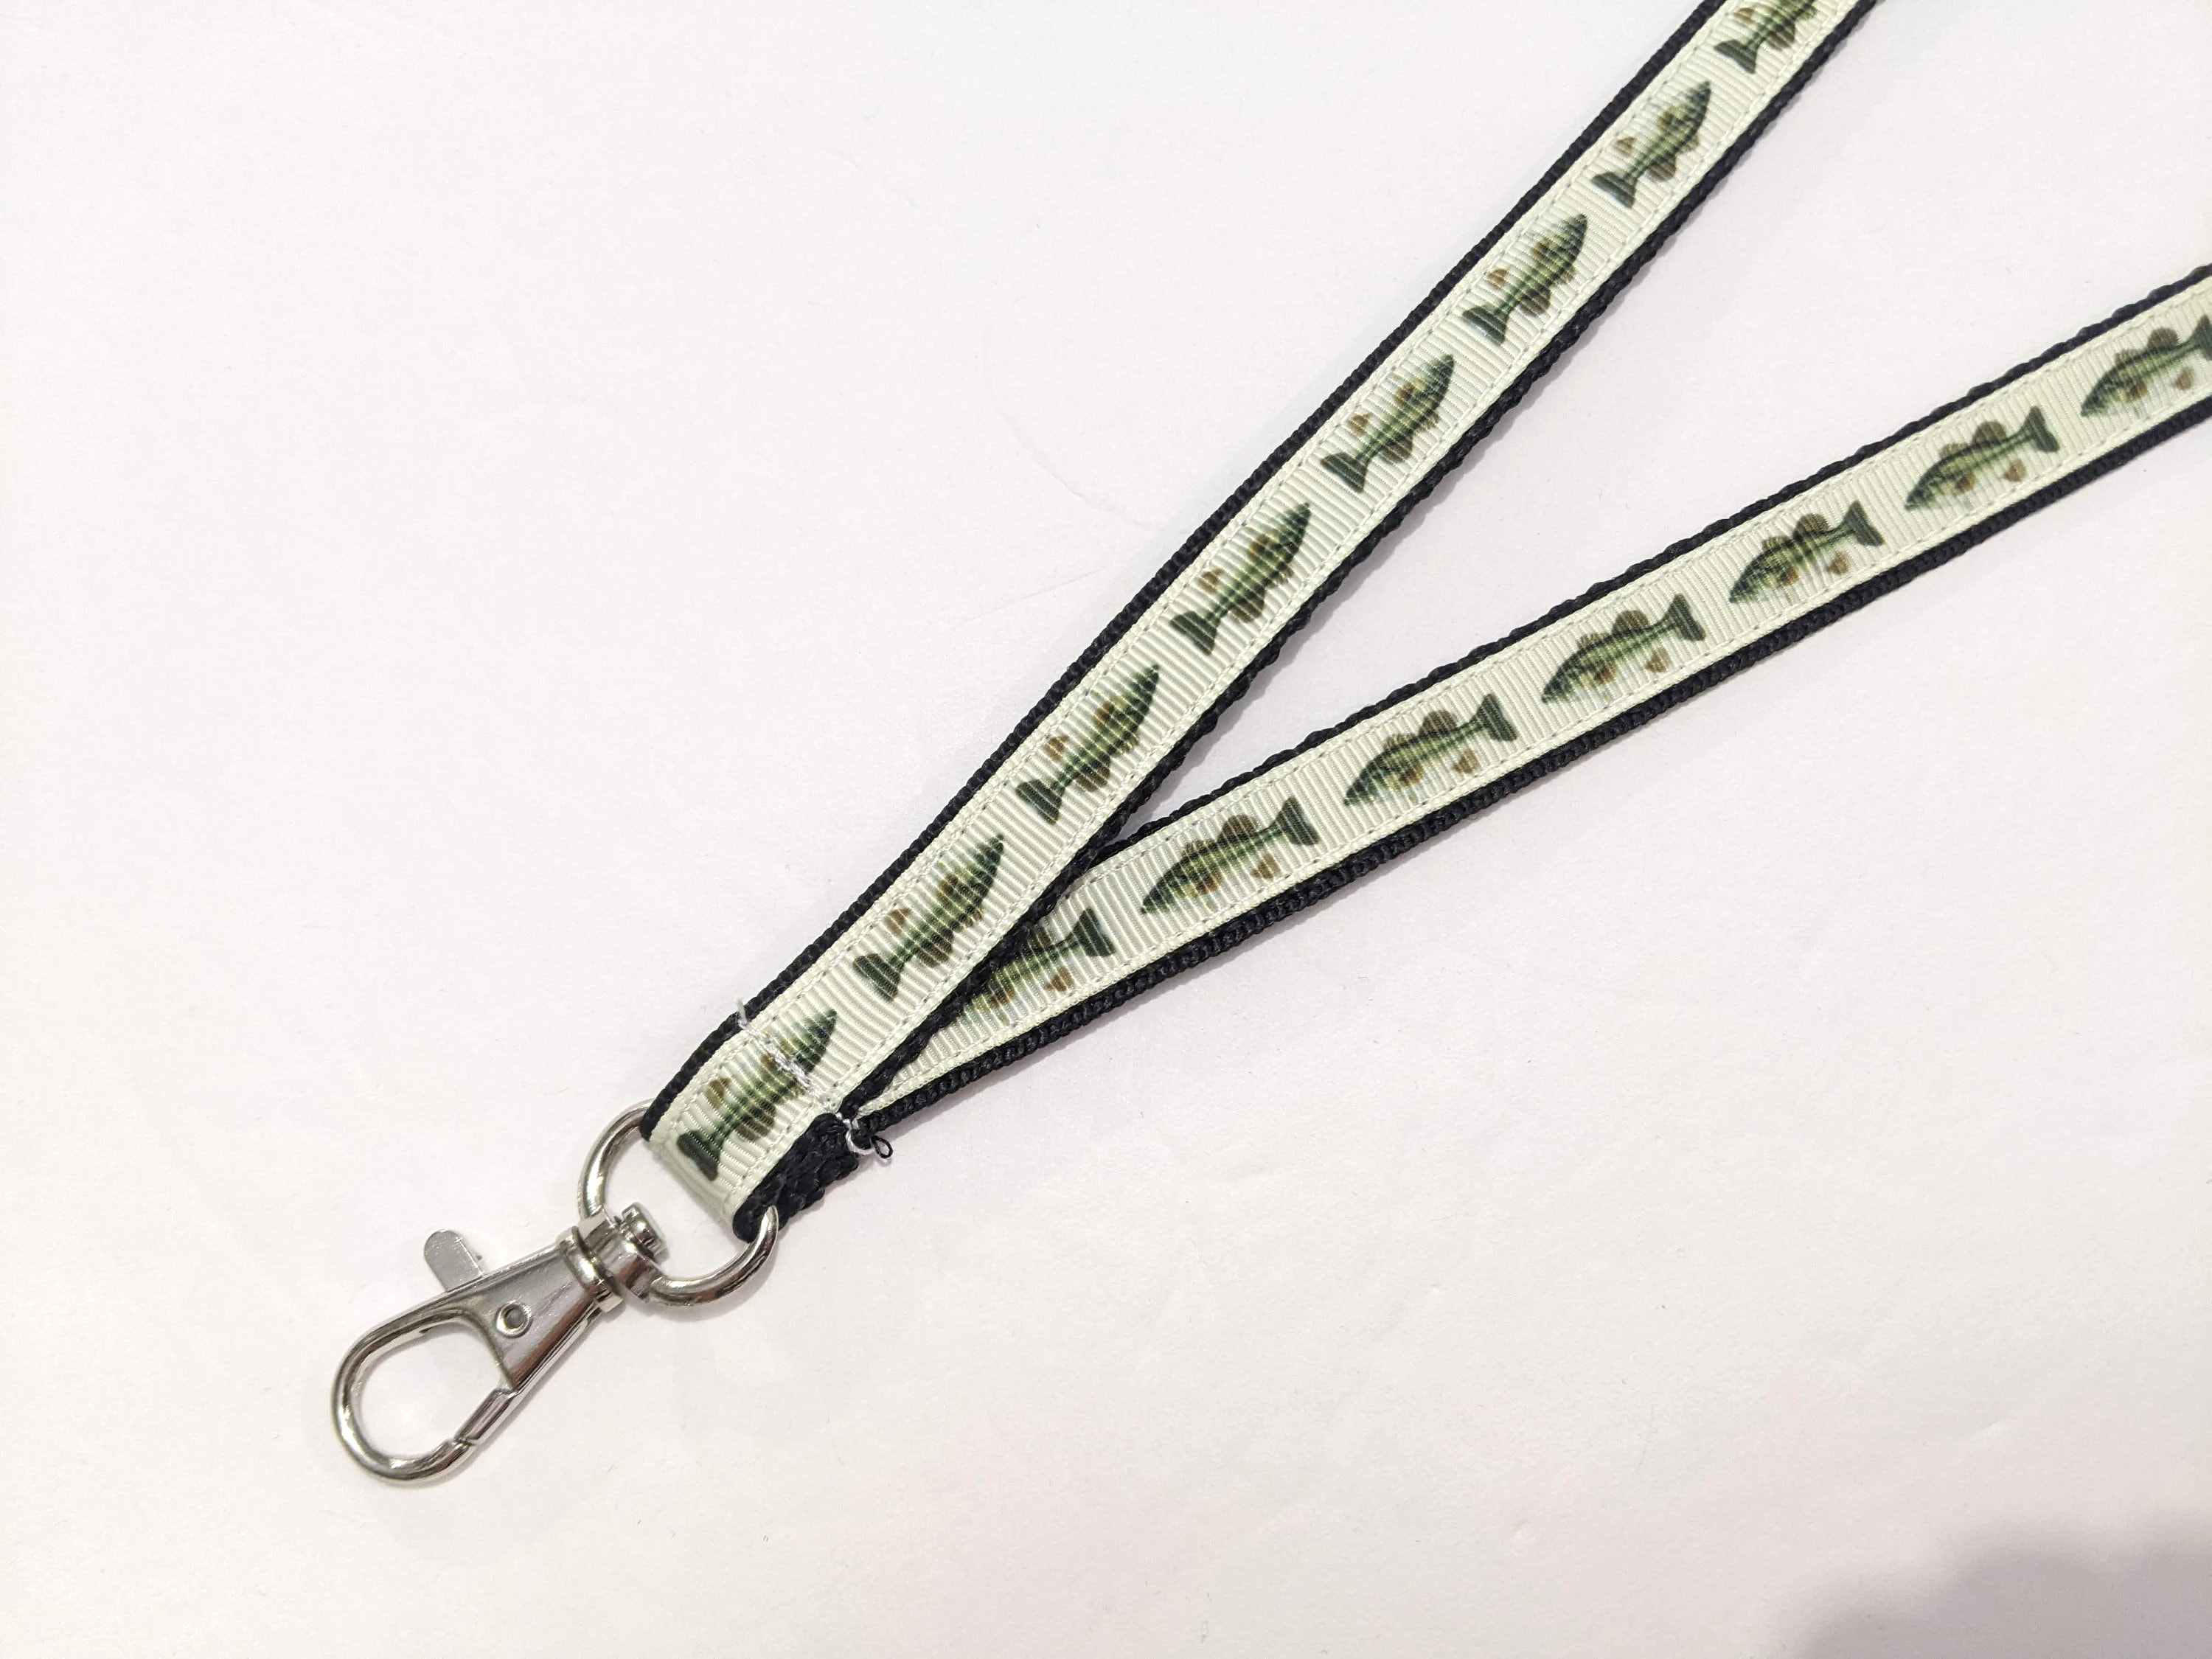 Personalized Keychain Lanyard  1 inch custom screen printing lanyard strap  with a black lobster clasp hook and a detachable buckle-LHP0802B